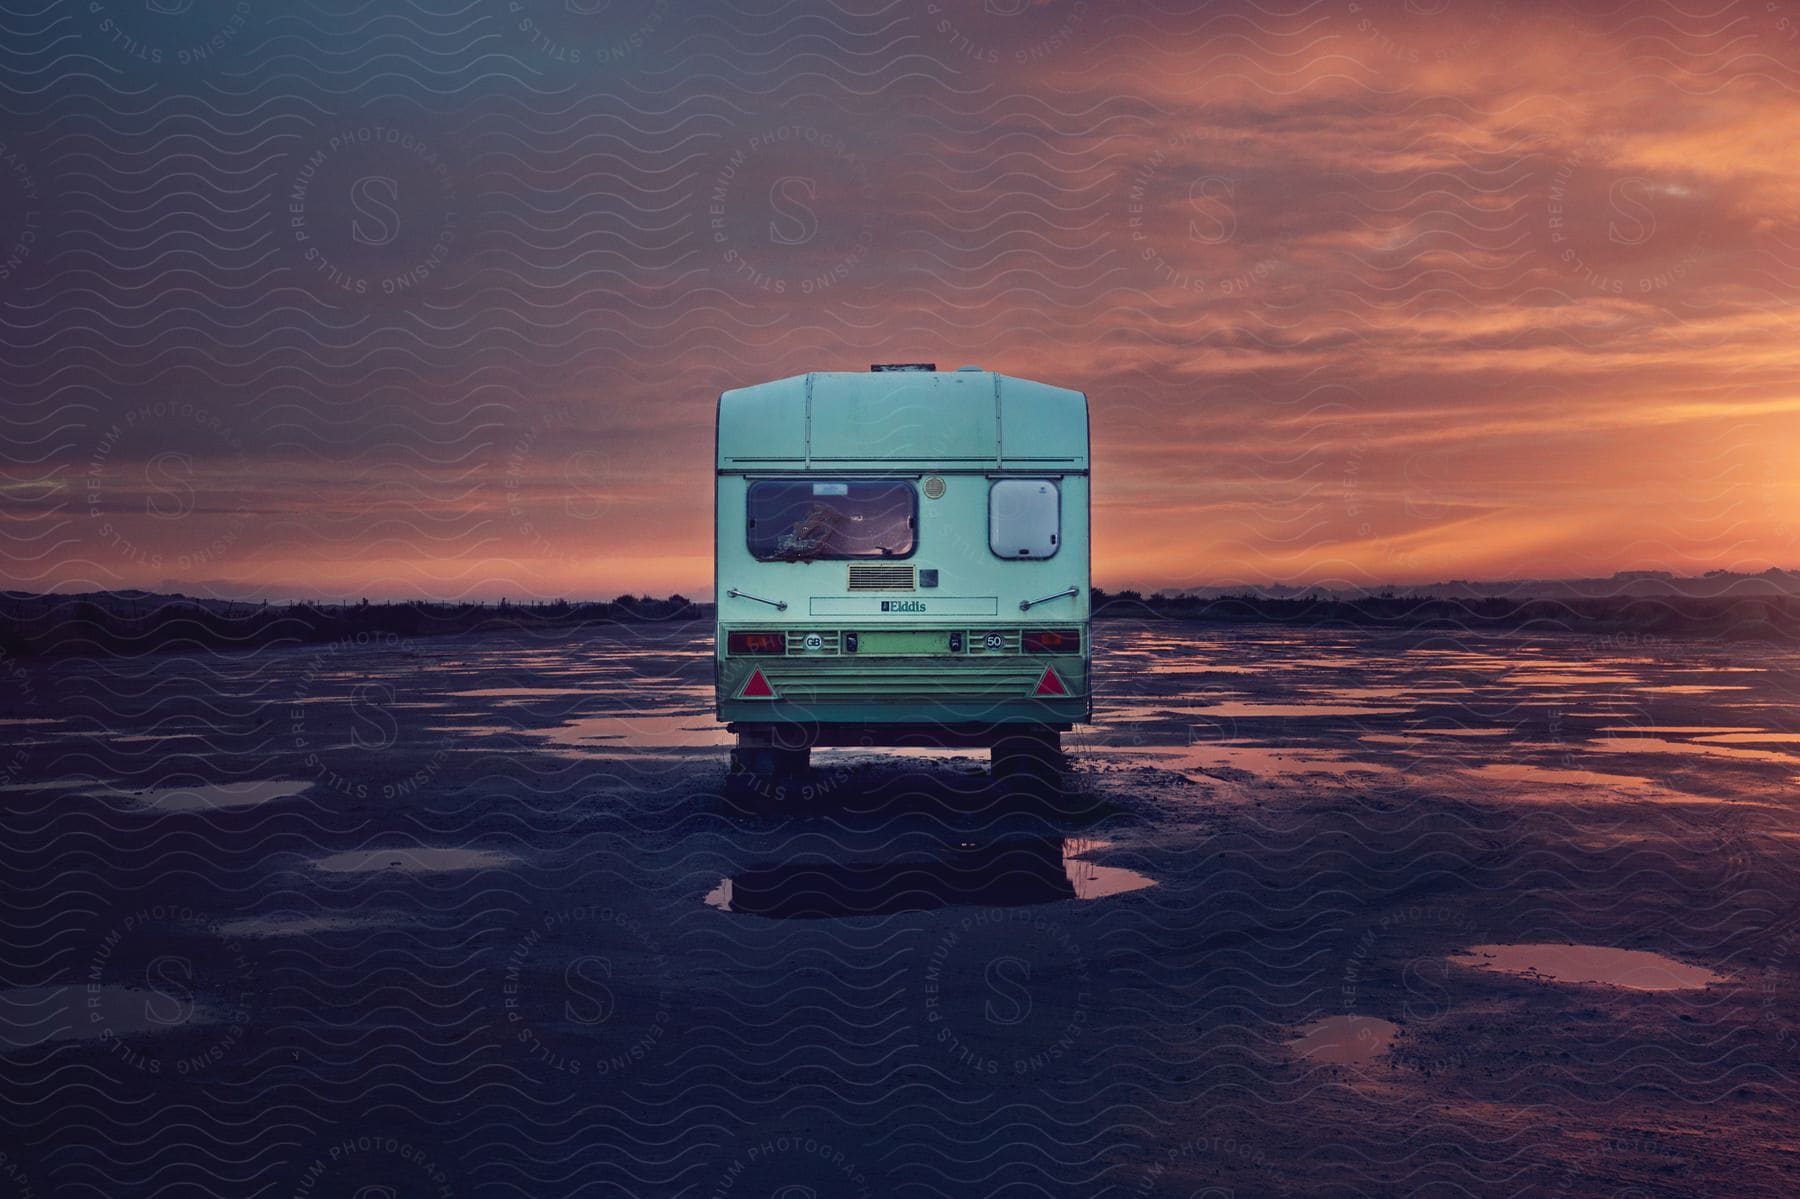 An rv parked by a lake at sunset under a dark and pink sky